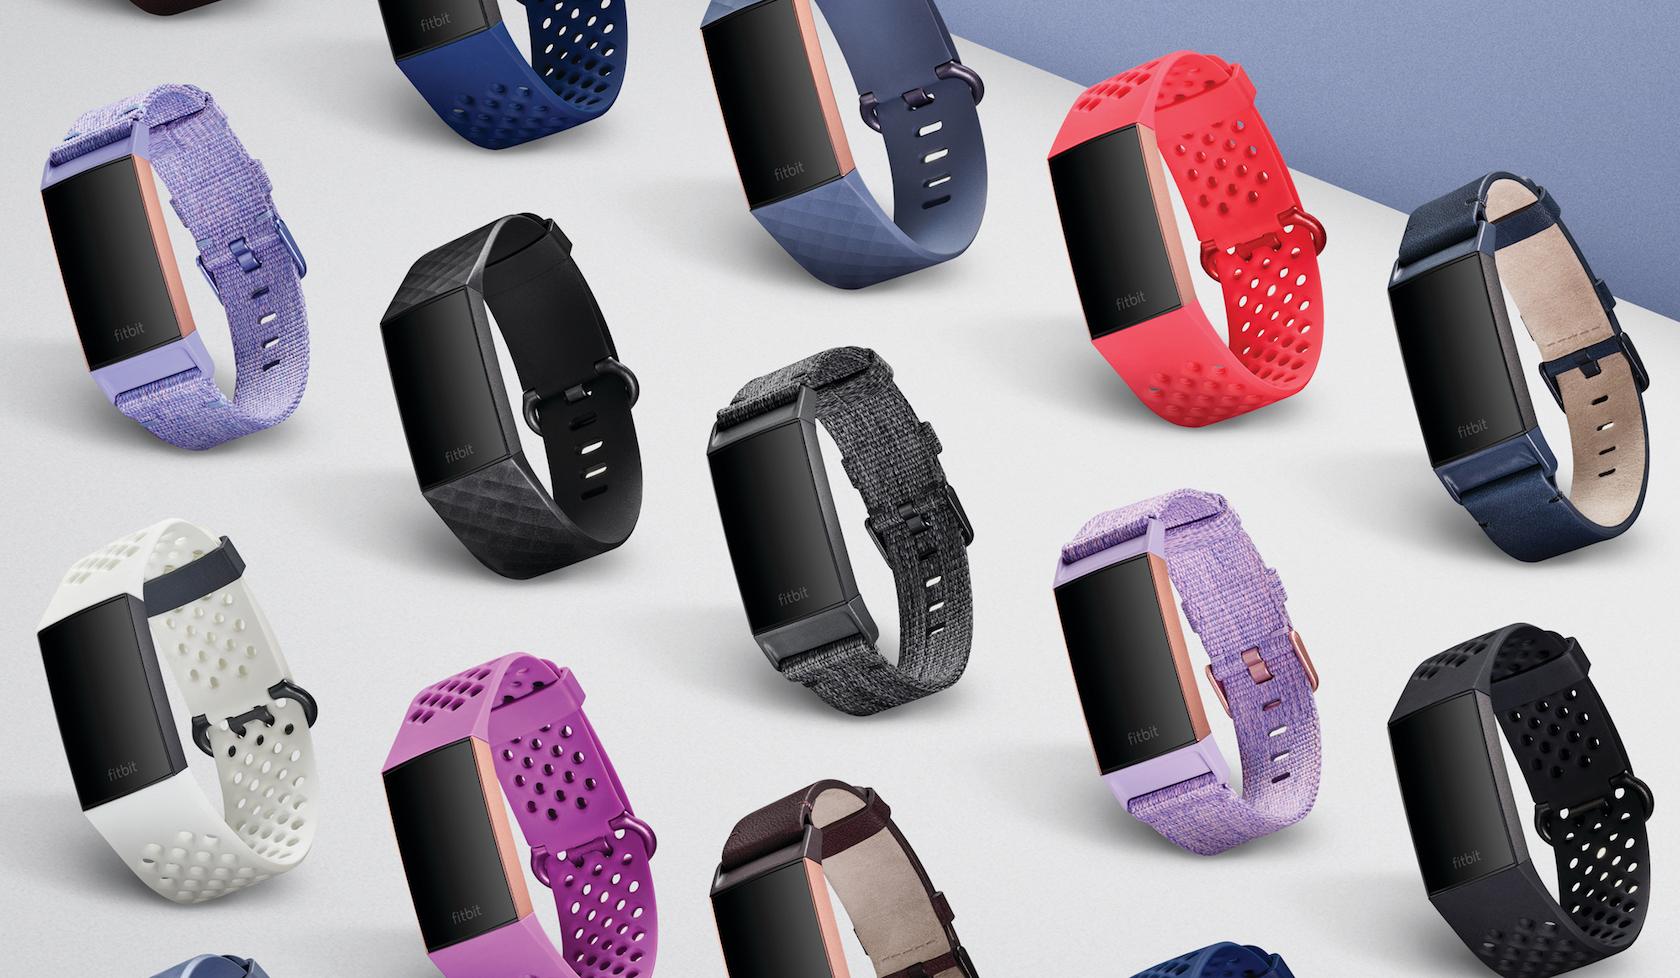 fitbit charge 3 spo2 release date